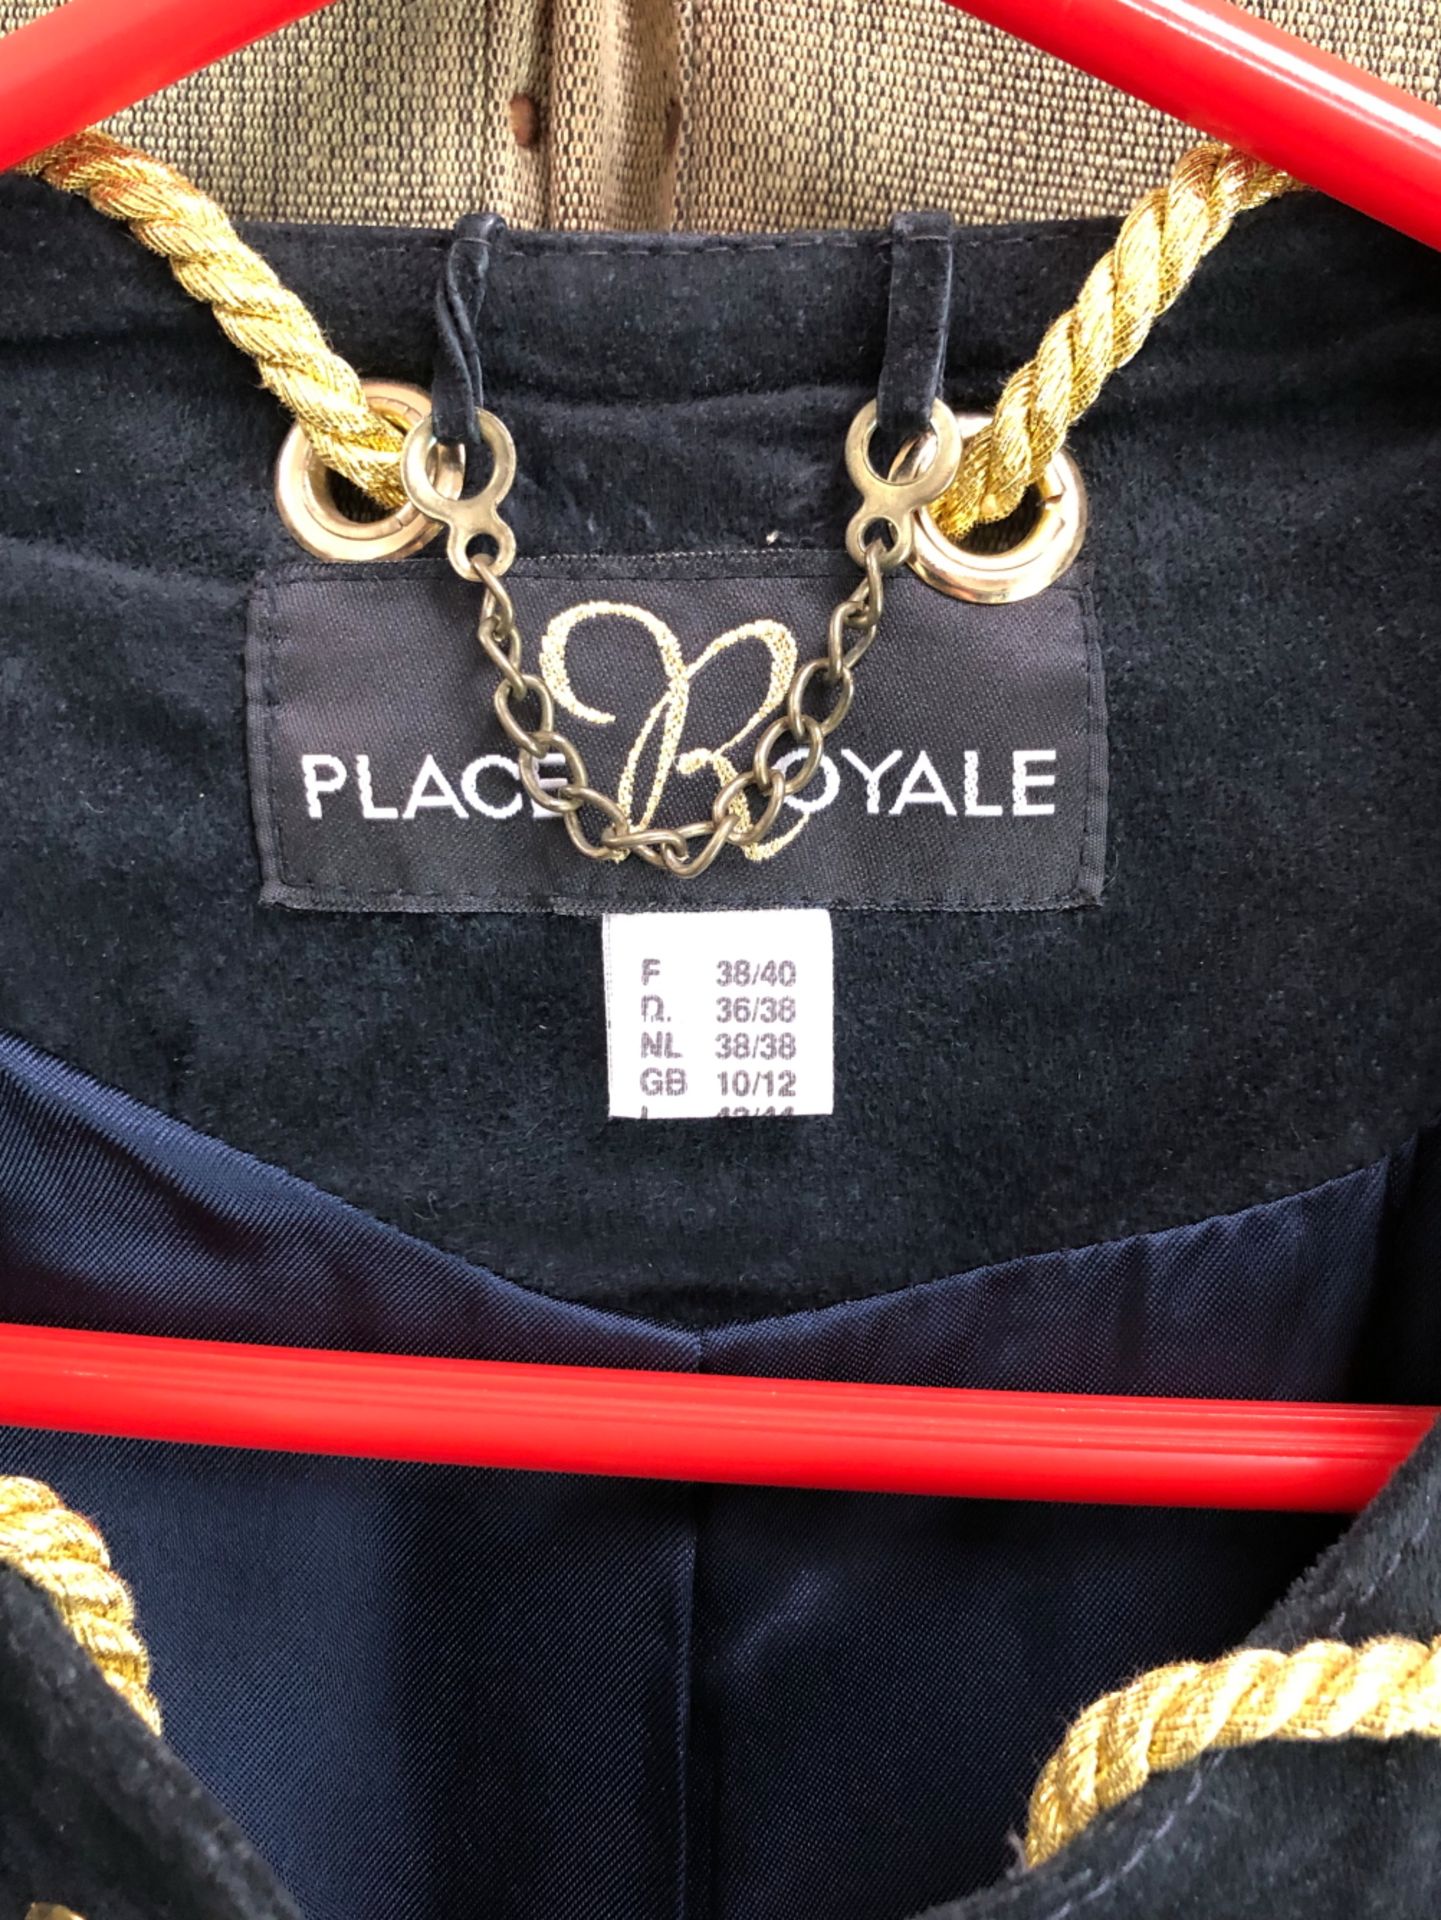 A DARK BLUE PLACE ROYALE SUEDE SHORT JACKET WITH GOLD STAR ROPE DETAIL GB 10/12 - Bild 2 aus 4